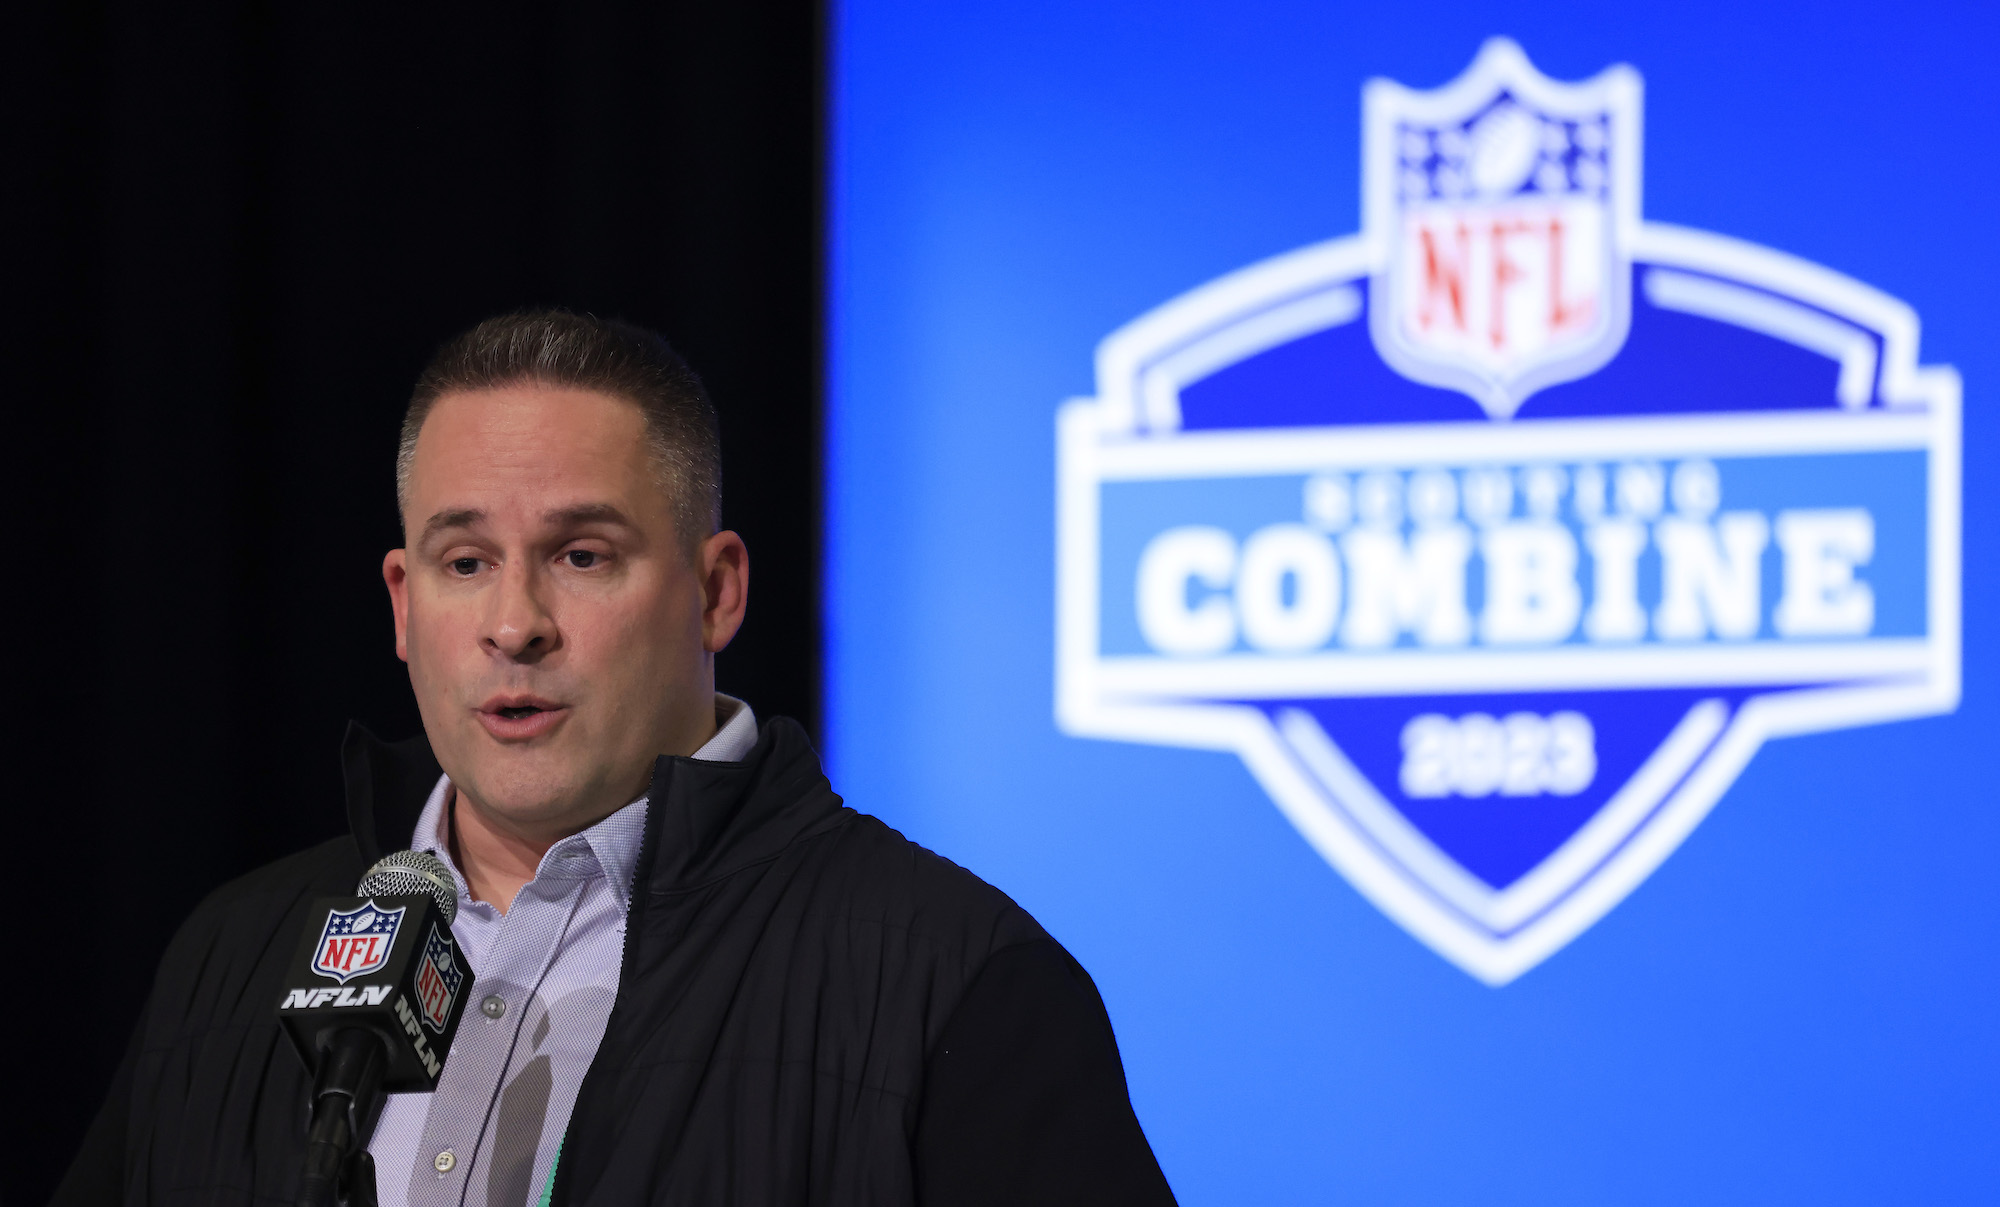 Head coach Josh McDaniels of the Las Vegas Raiders speaks to the media during the NFL Combine at Lucas Oil Stadium on February 28, 2023 in Indianapolis, Indiana.